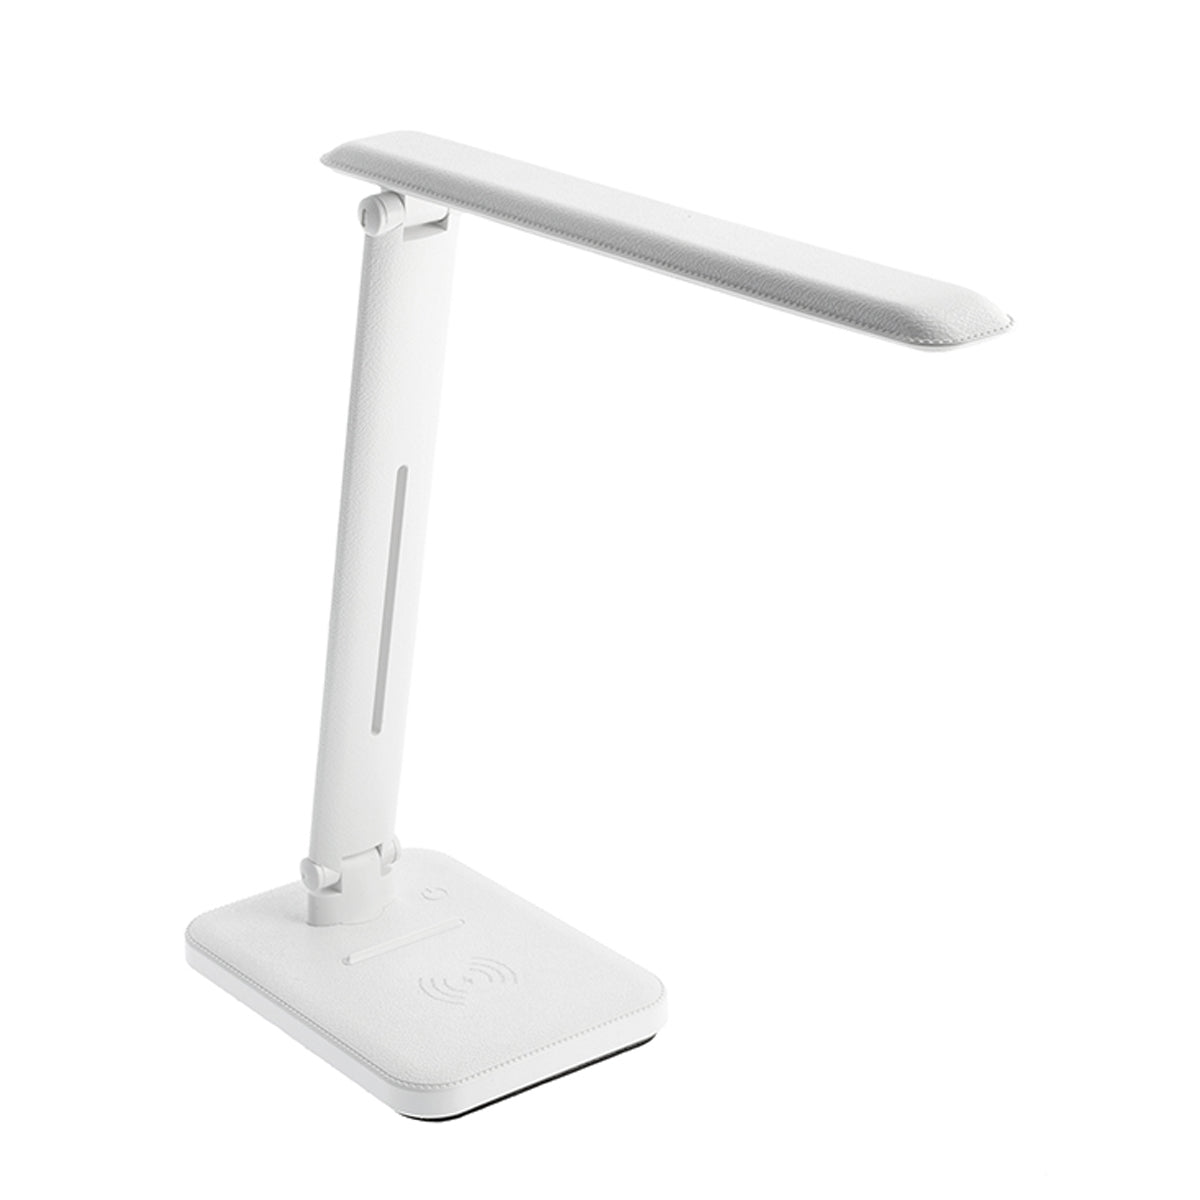 CGC IZZY White LED Desk Lamp With Wireless Charger